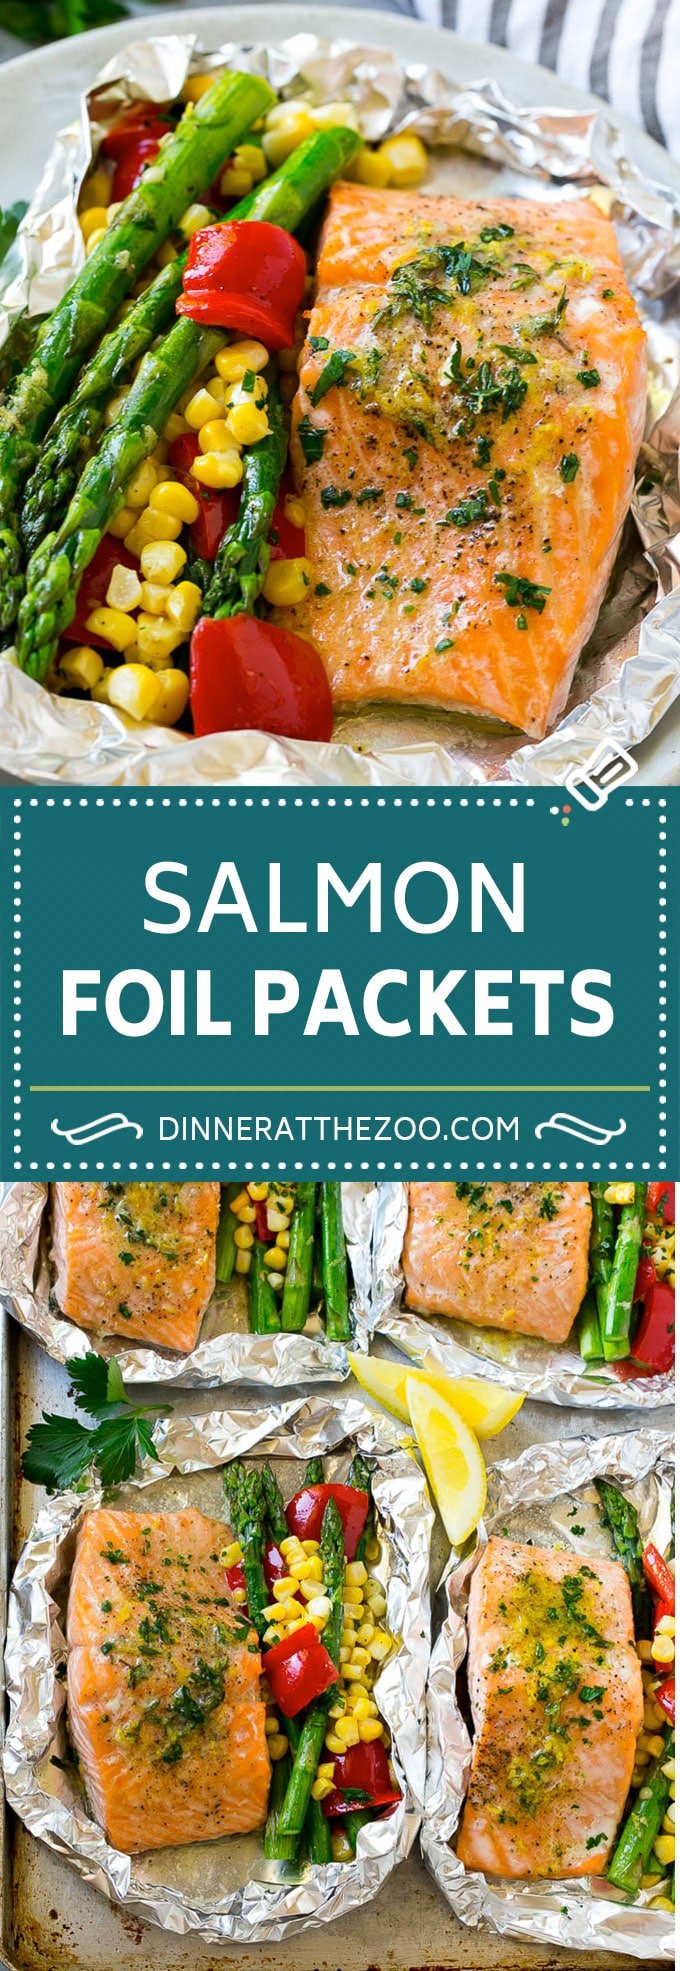 Salmon Foil Packets Recipe | Grilled Salmon | Salmon and Vegetables #salmon #grilling #asparagus #corn #dinner #dinneratthezoo